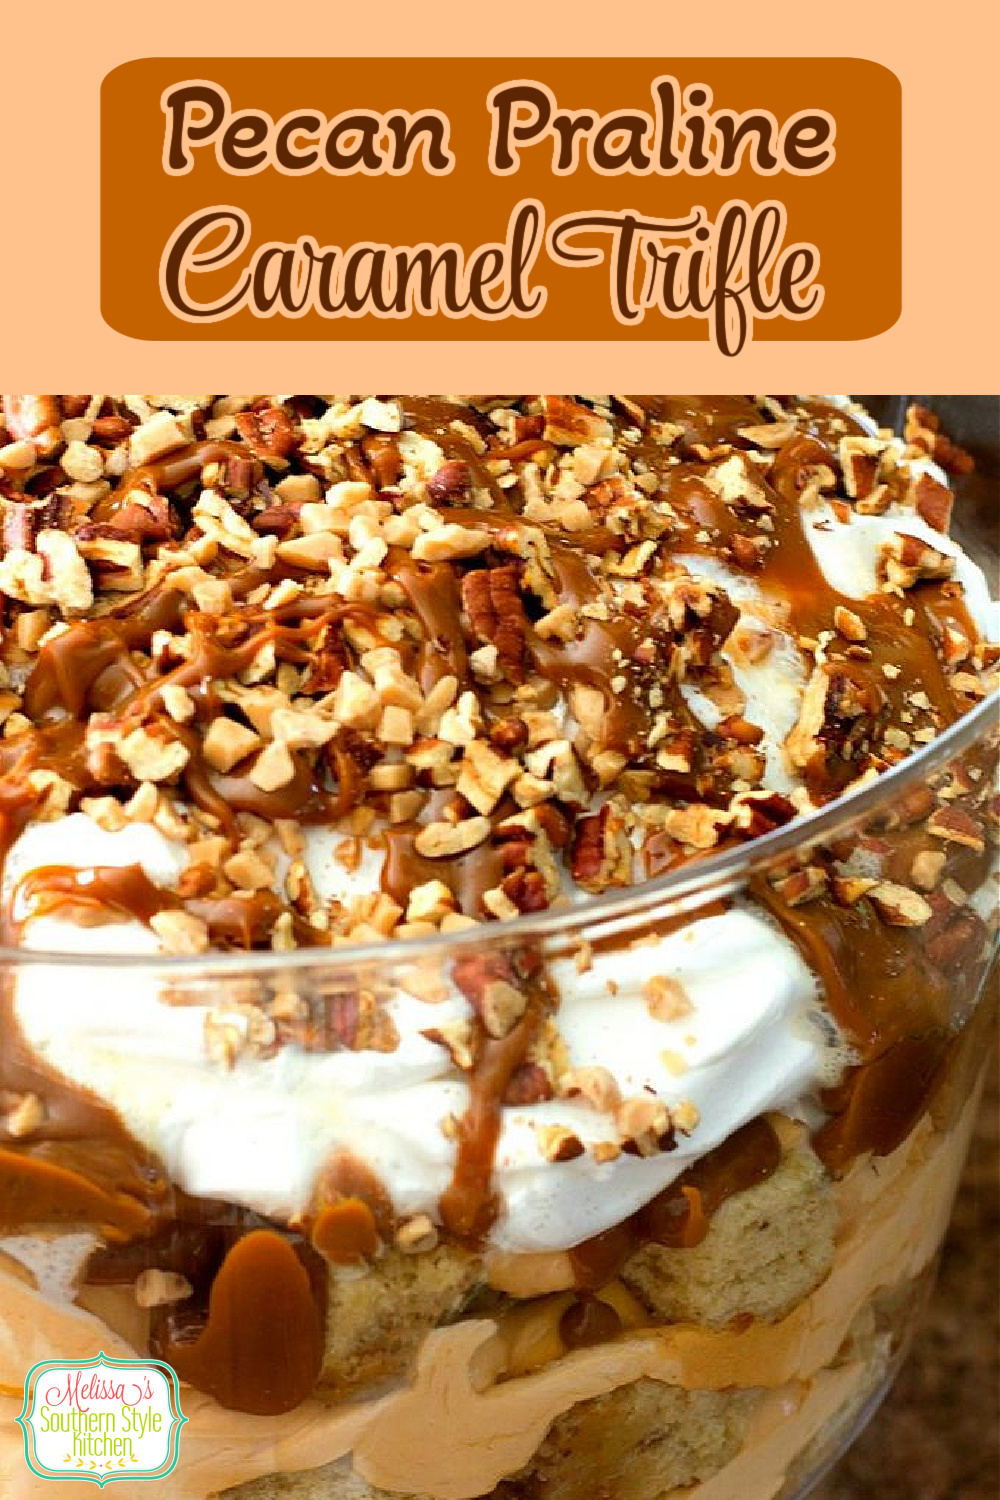 This decadent Pecan Praline Caramel Trifle features the irresistible flavors of Southern pralines, buttermilk pound cake and caramel #pecanpralines #pralines #trifle #caramel #carameltrifle #southernpralines #trifledesserts #desserts #dessertfoodrecipes #holidaydesserts #Christmas #Thanksgiving #christmasdesserts #pecans #southernrecipes #southernfood #melissassouthernstylekitchen via @melissasssk